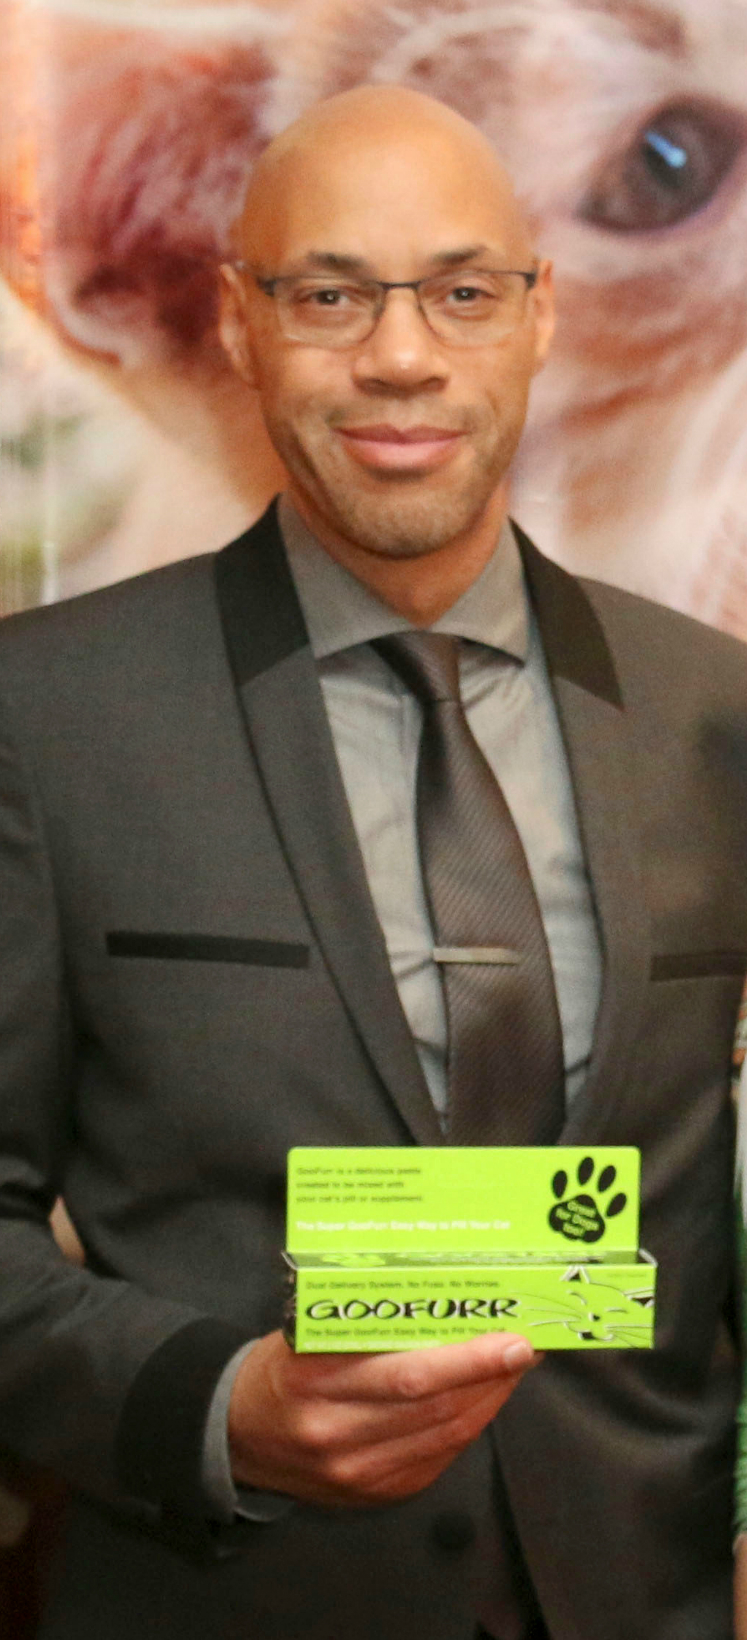 Nominee and Oscar winner John Ridley from 12 Years a Slave at Secret Room Events Red Carpet Style Lounge honoring the 86th Academy Awards